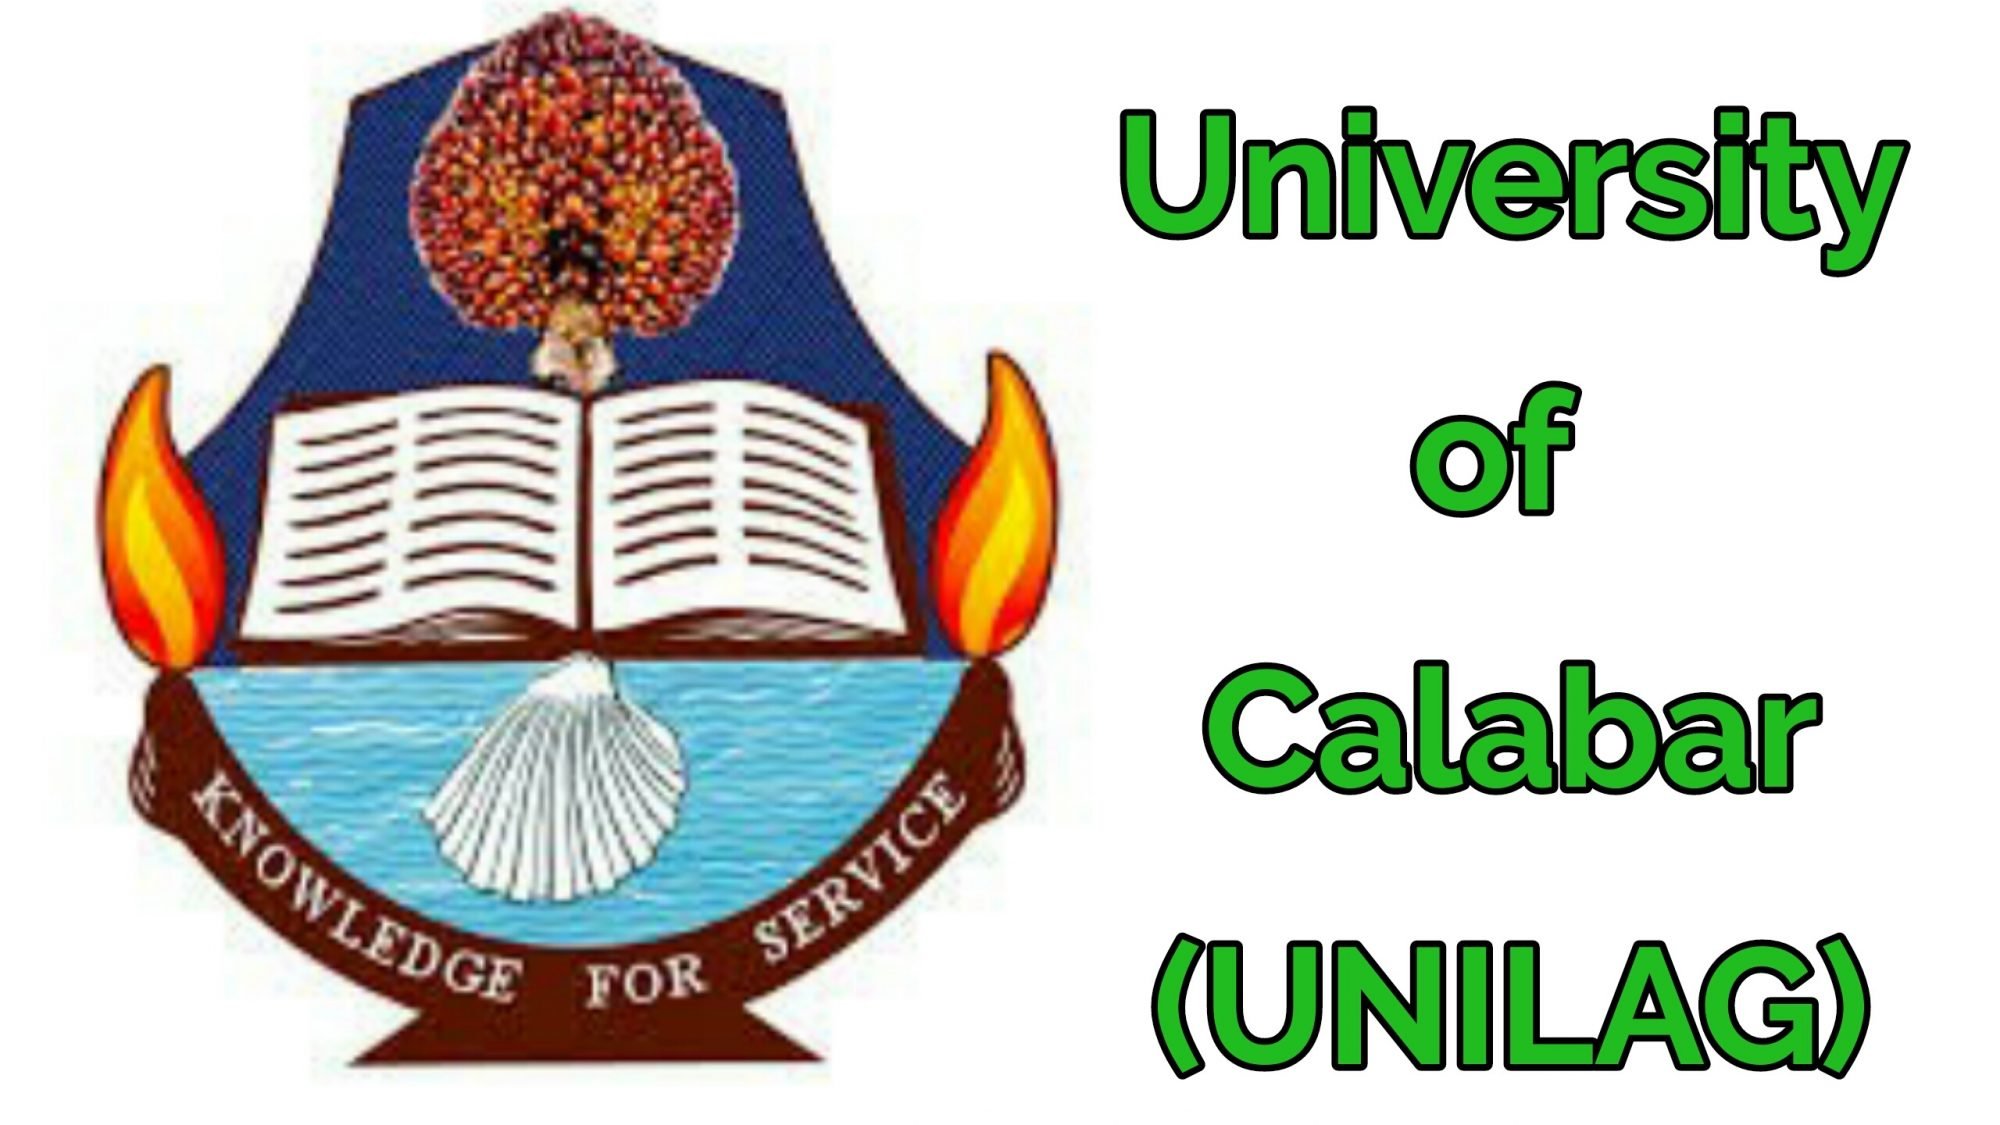 UNICAL Admission Requirements 2020/2021: UTME & Direct Entry